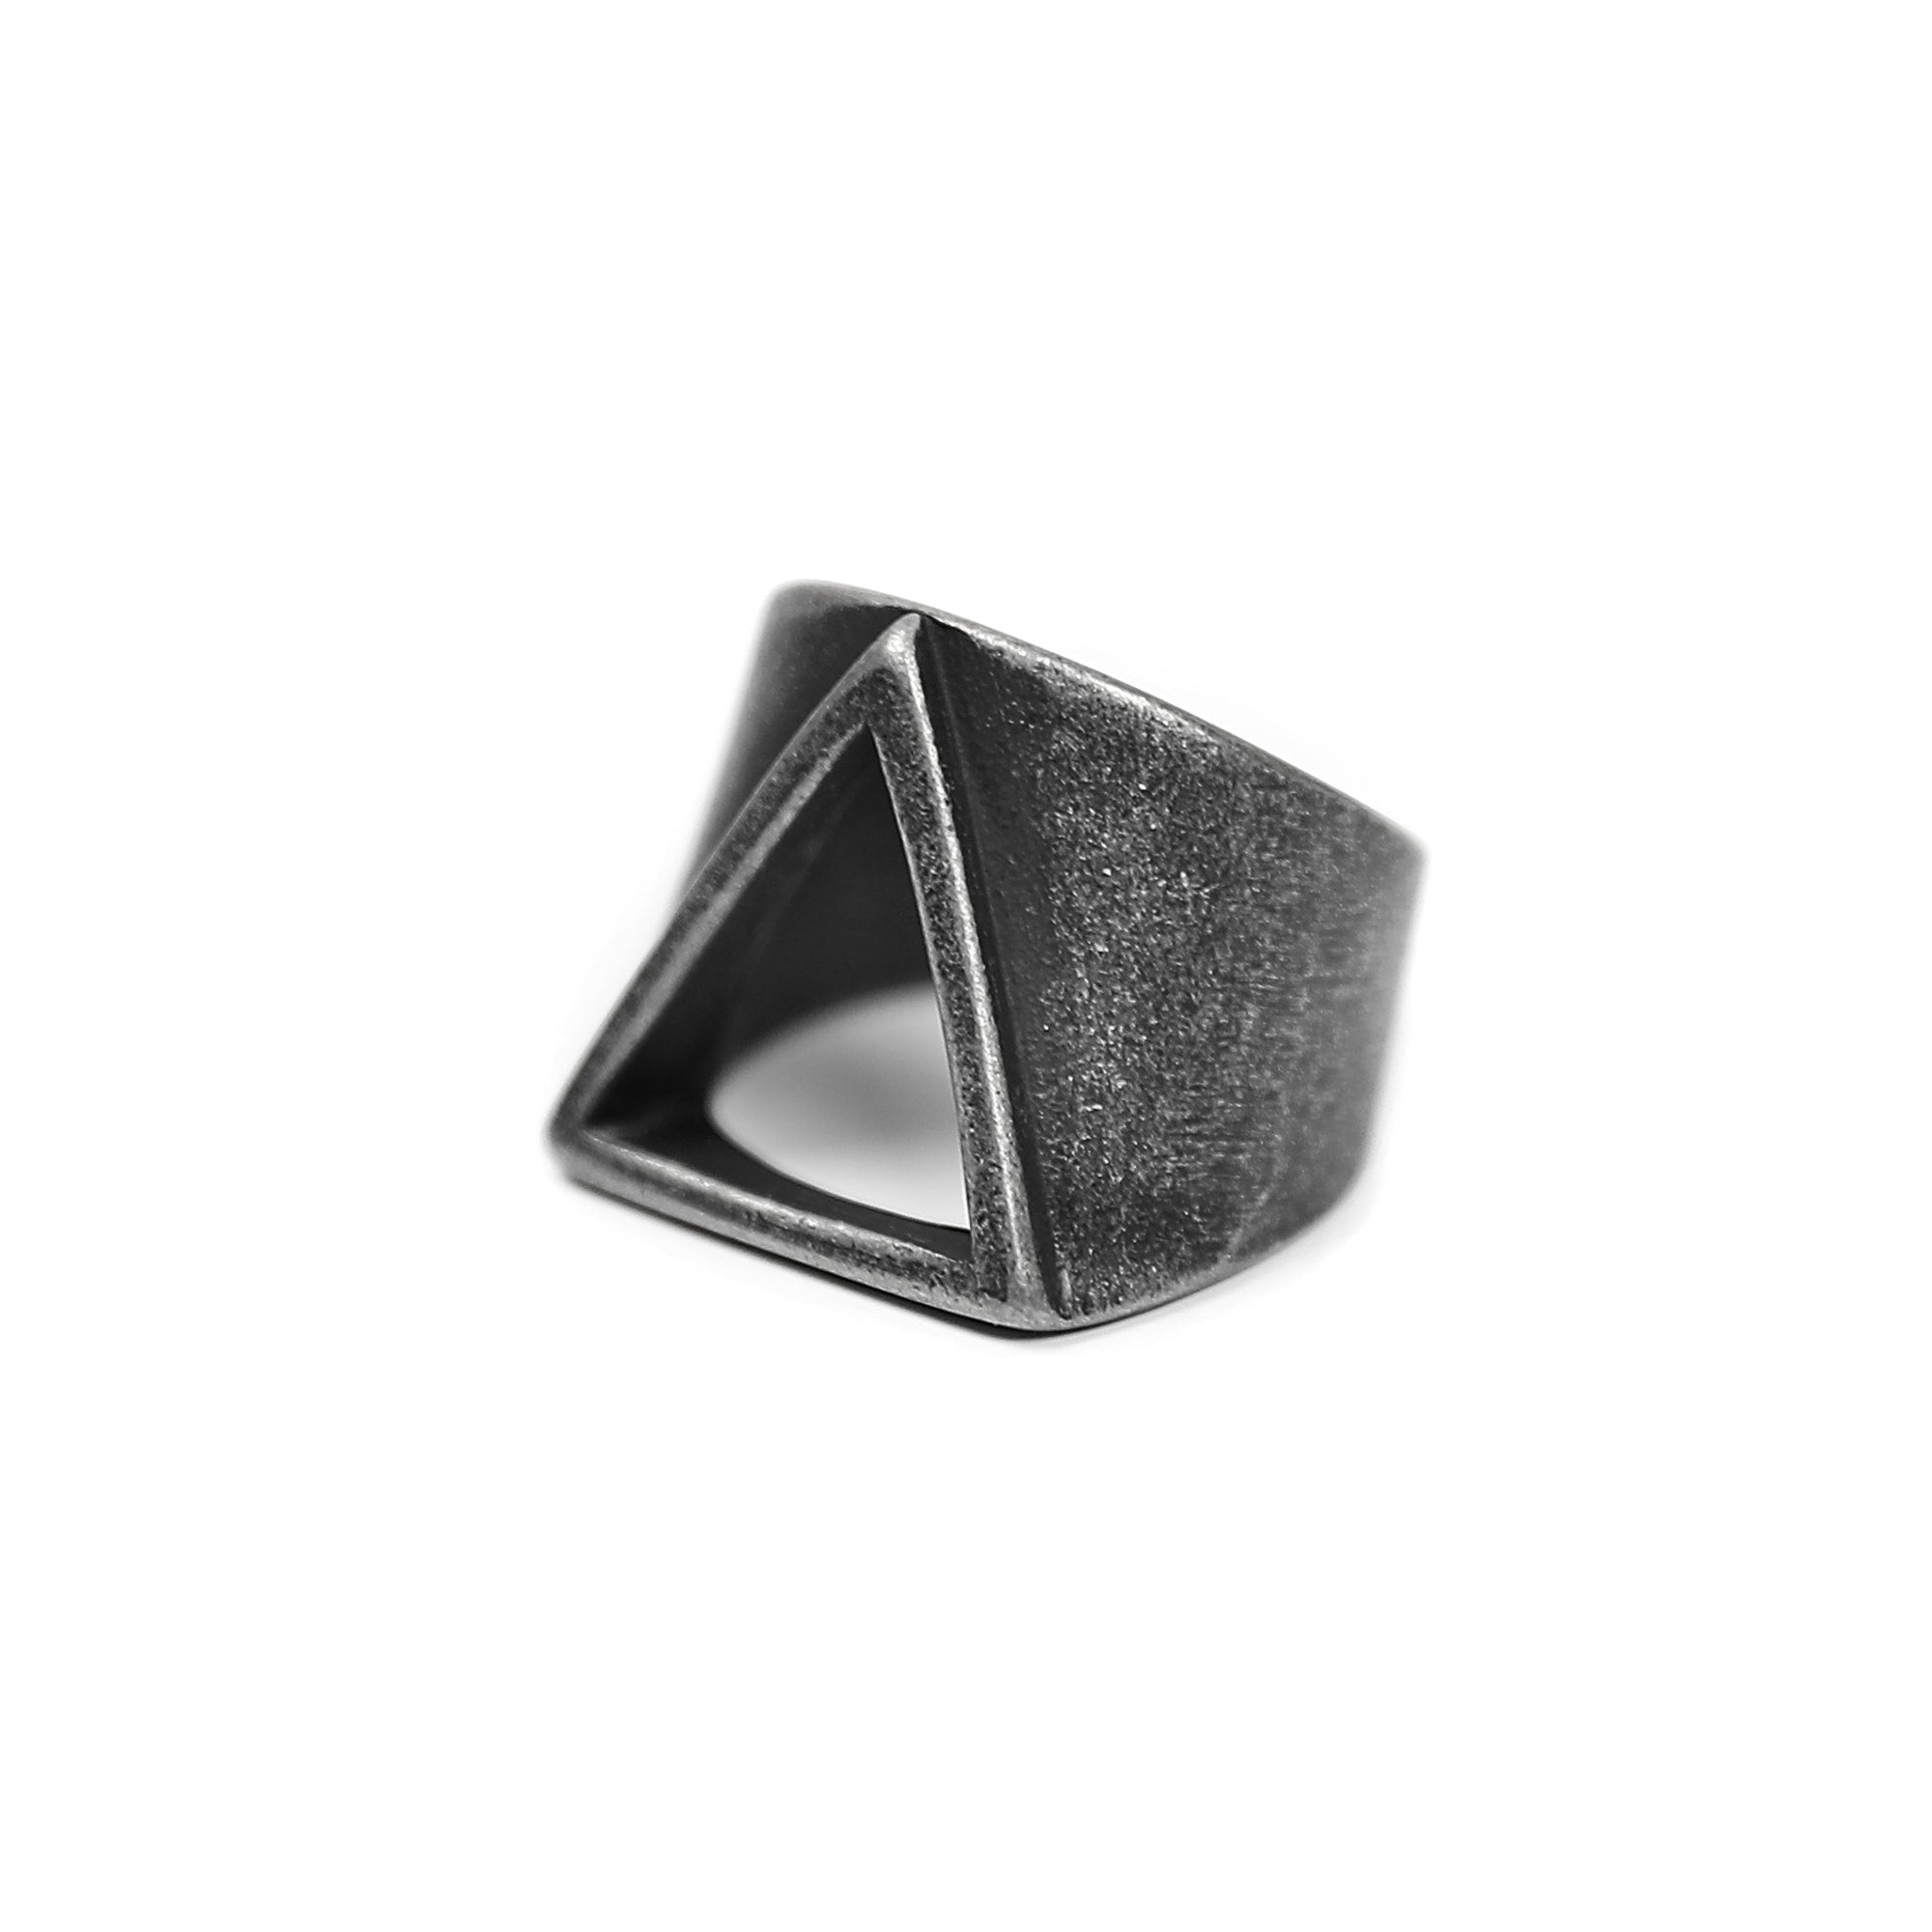 Triangle Cutout Ring - Antique Silver